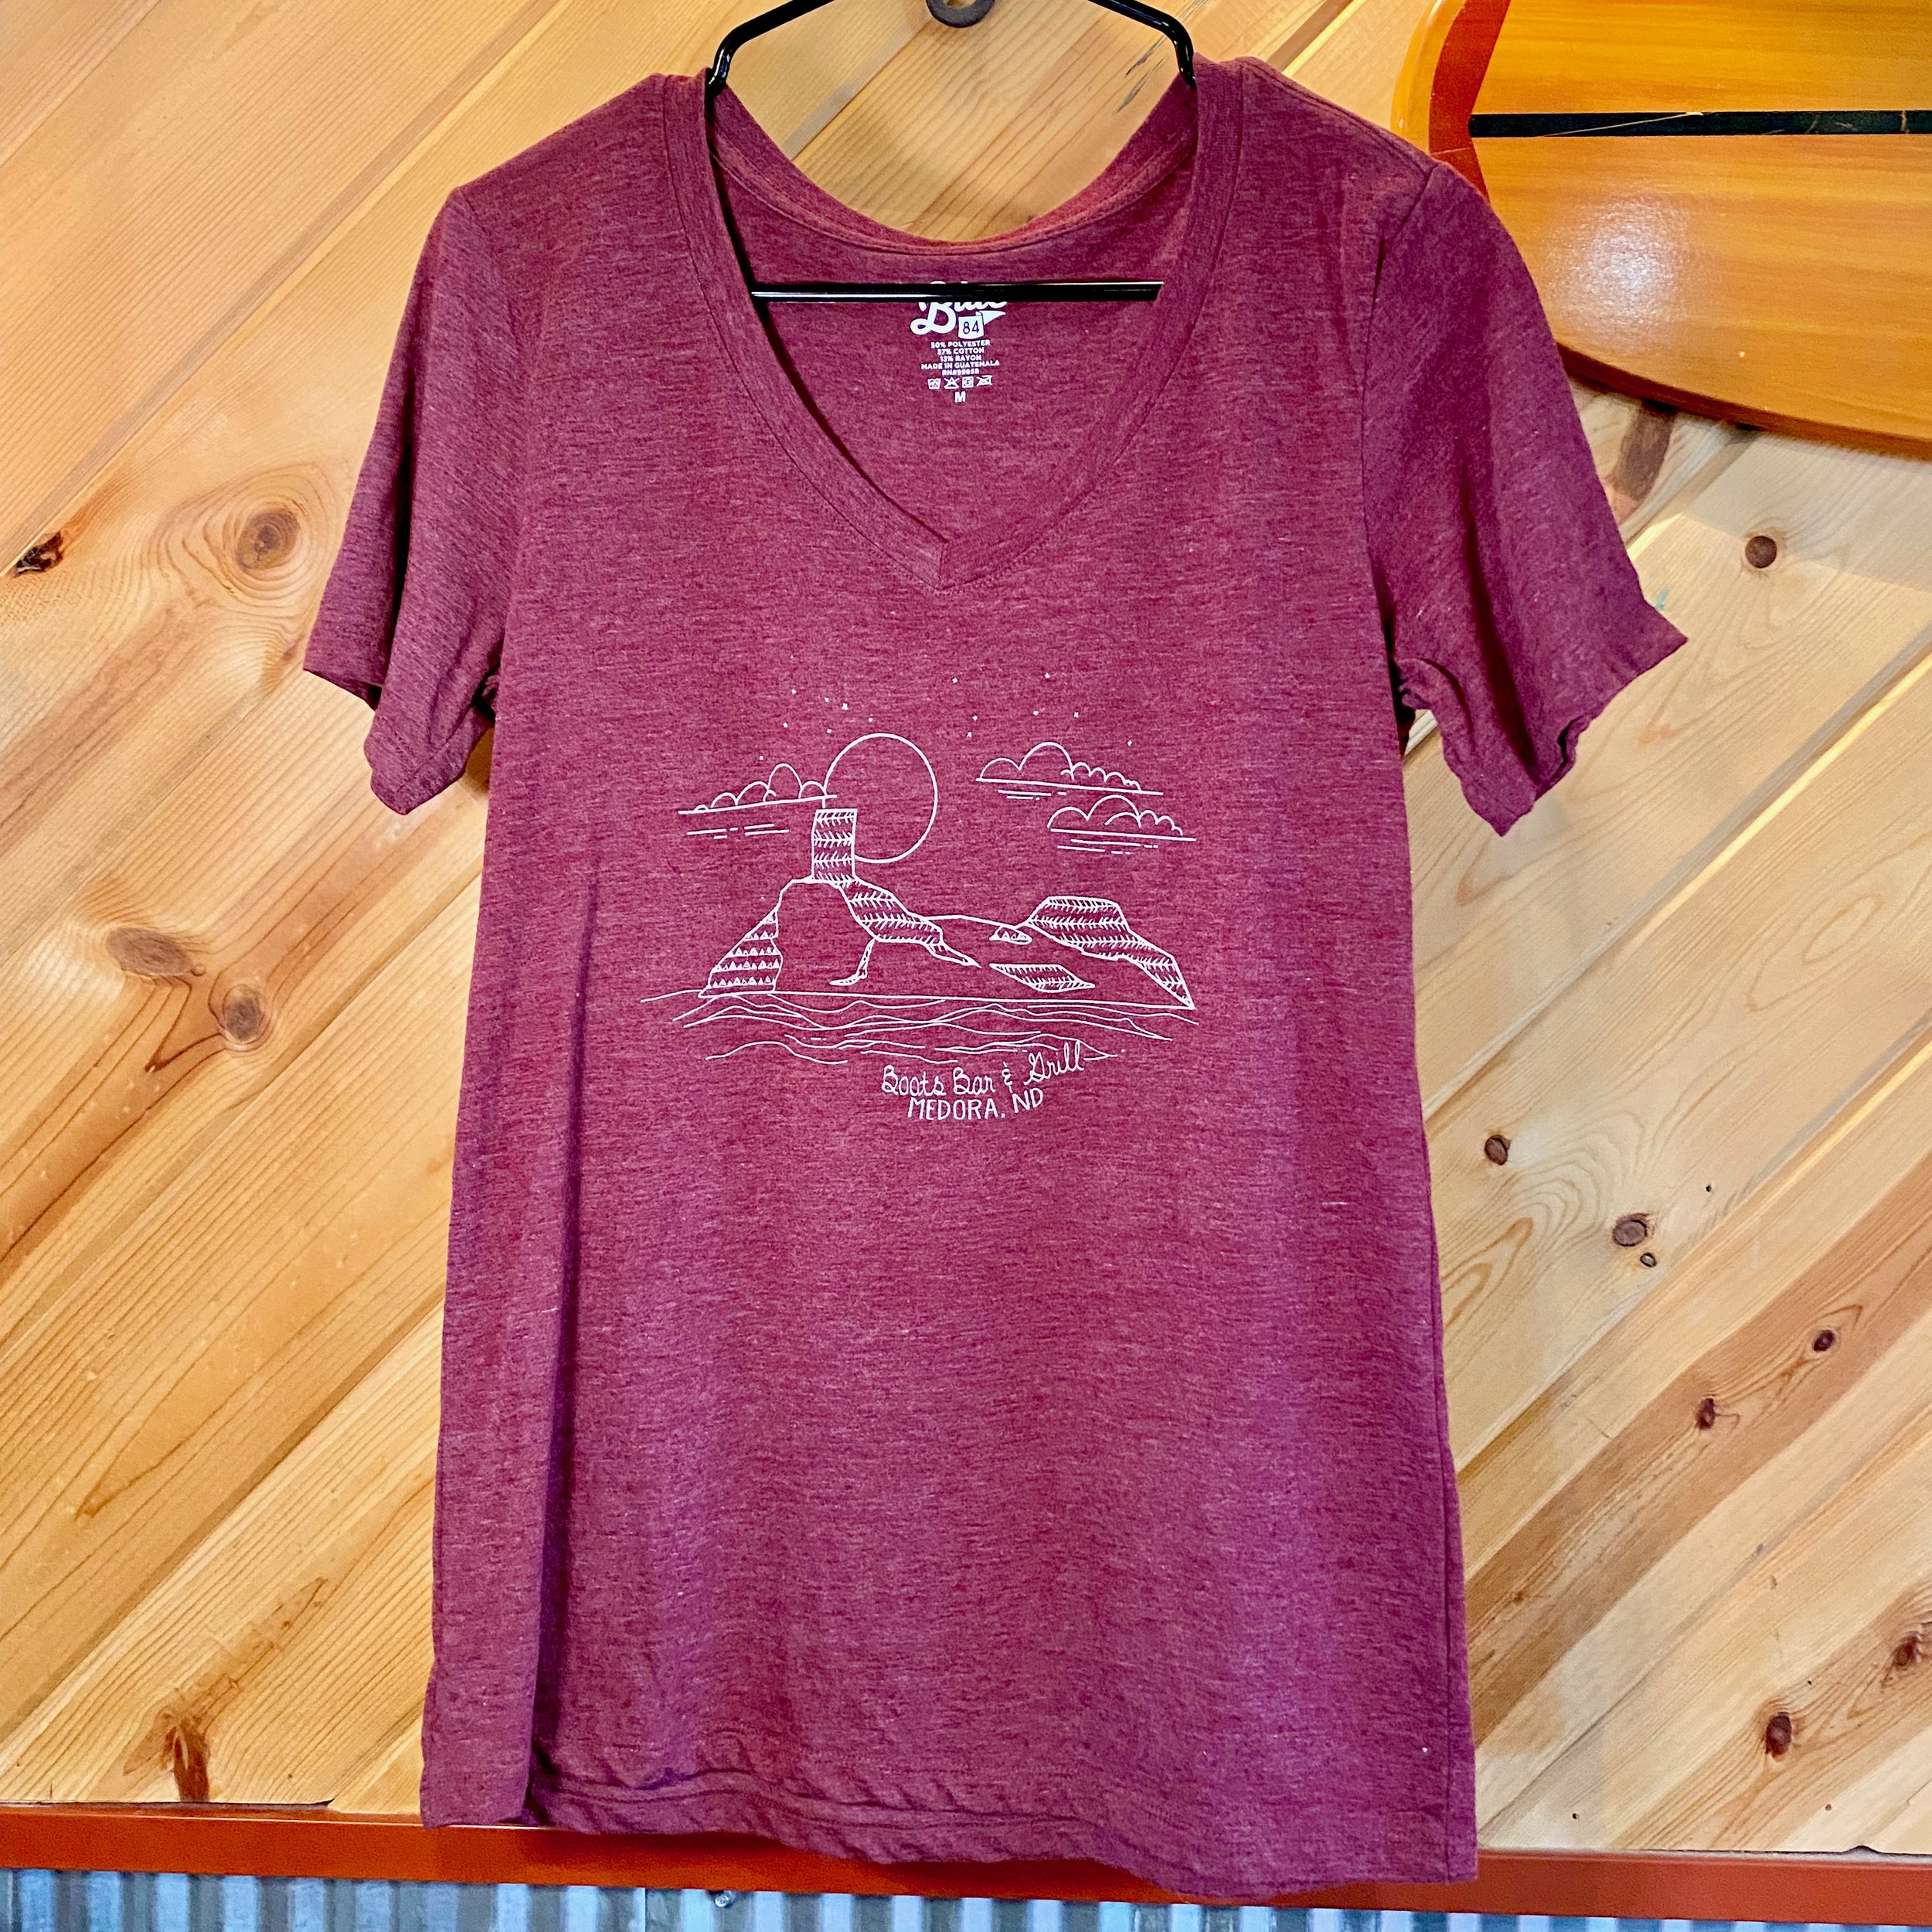 Shop North Dakota and Boots Bar Merchandise — Boots Bar and Grill